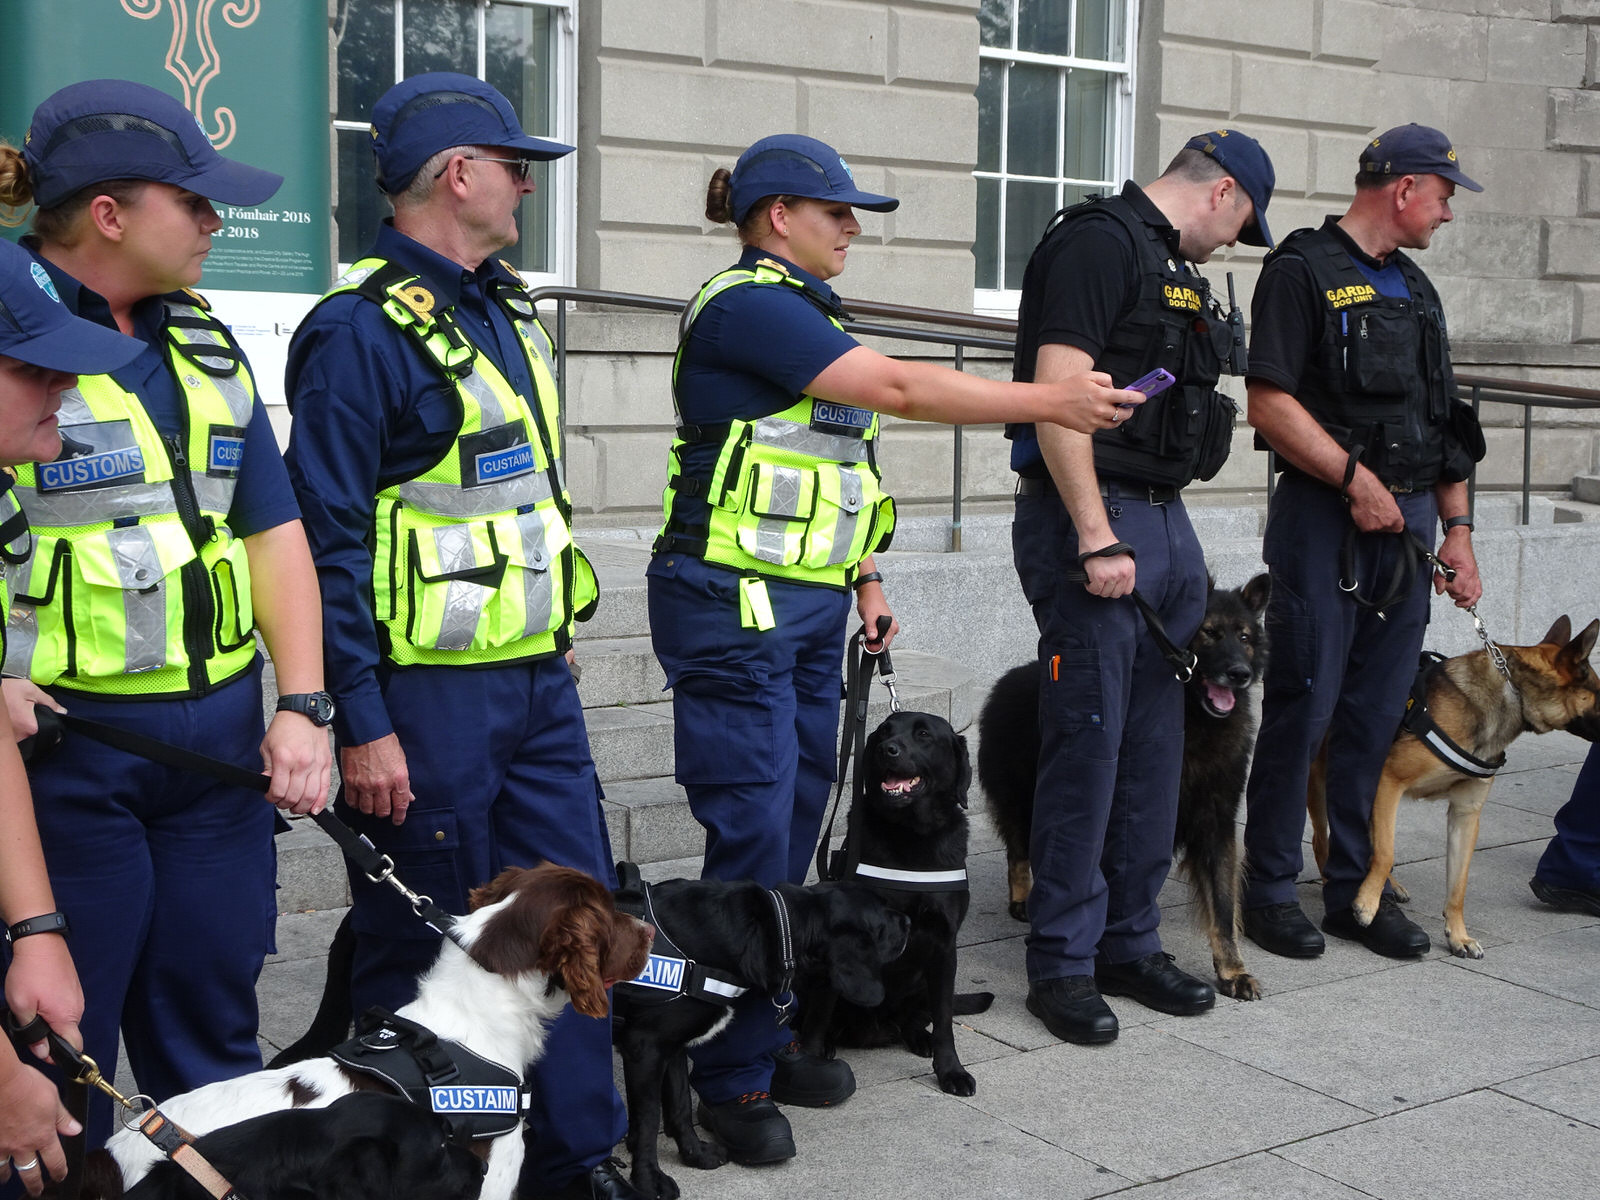 THE DOGS WHO WORK FOR THE IRISH CUSTOMS SERVICE [INVITED THE PRESS TO A PHOTO-SHOOT]
 003